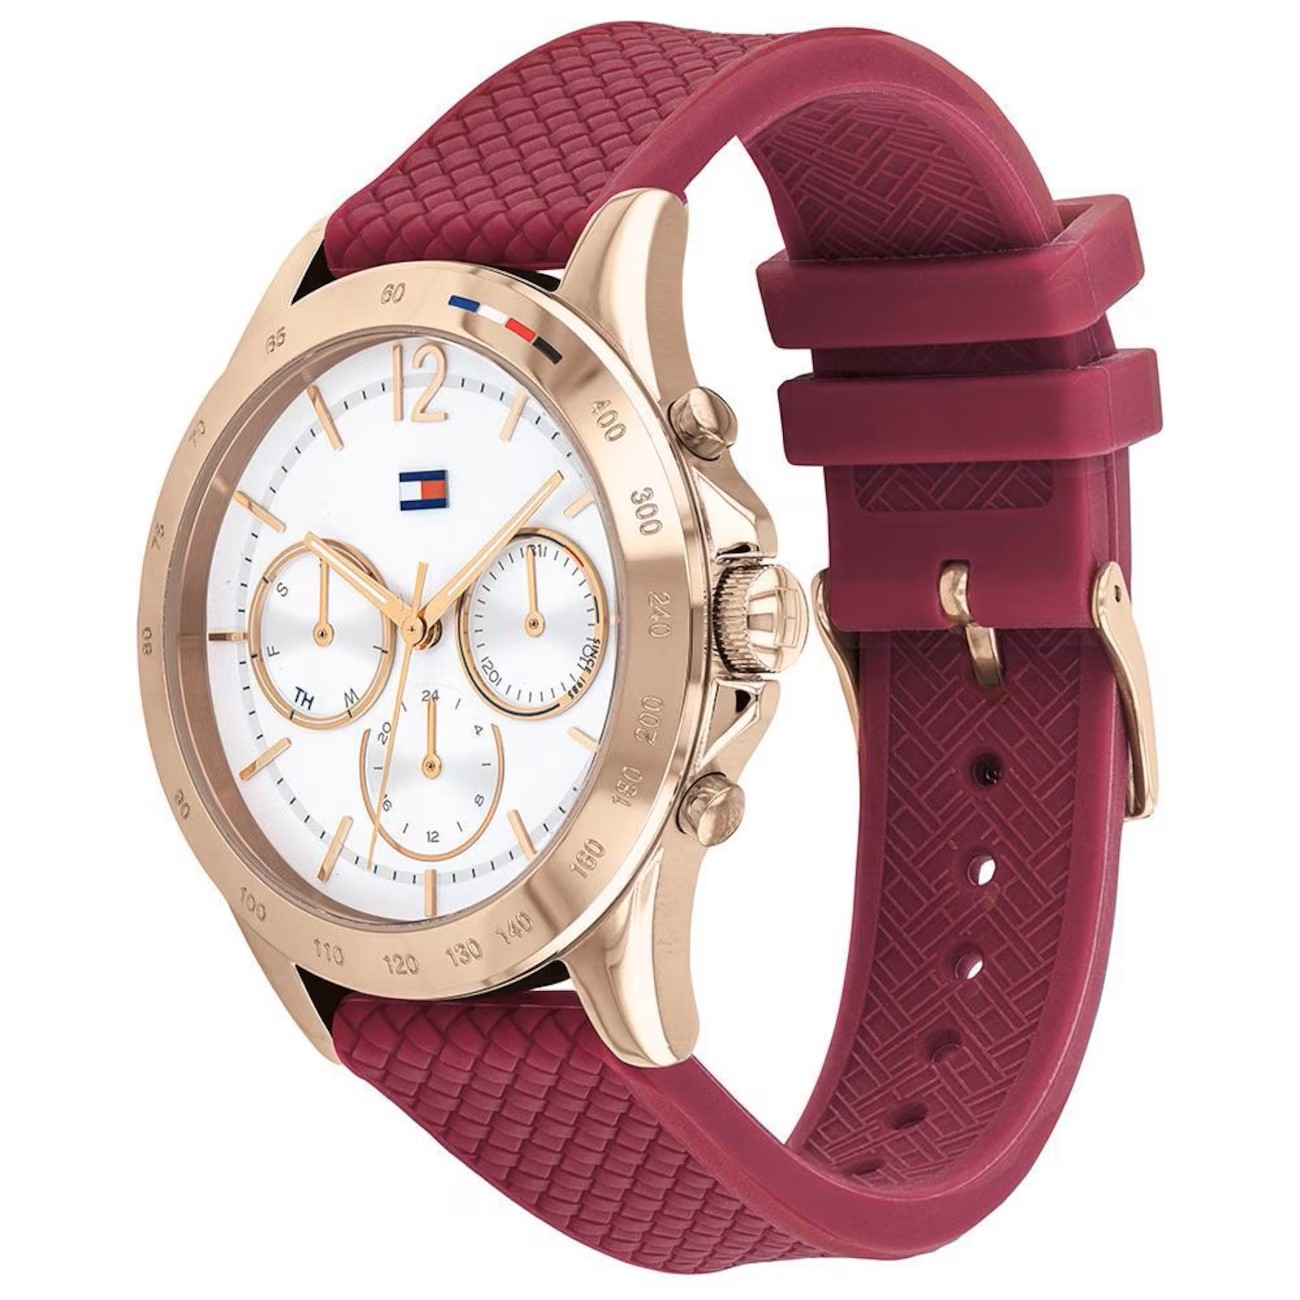 ĐỒNG HỒ NỮ TOMMY HILFIGER ROSE GOLD SPORT WATCH WITH RED SILICONE STRAP HAVEN ANALOG WATCH FOR WOMEN TH1782200W 11